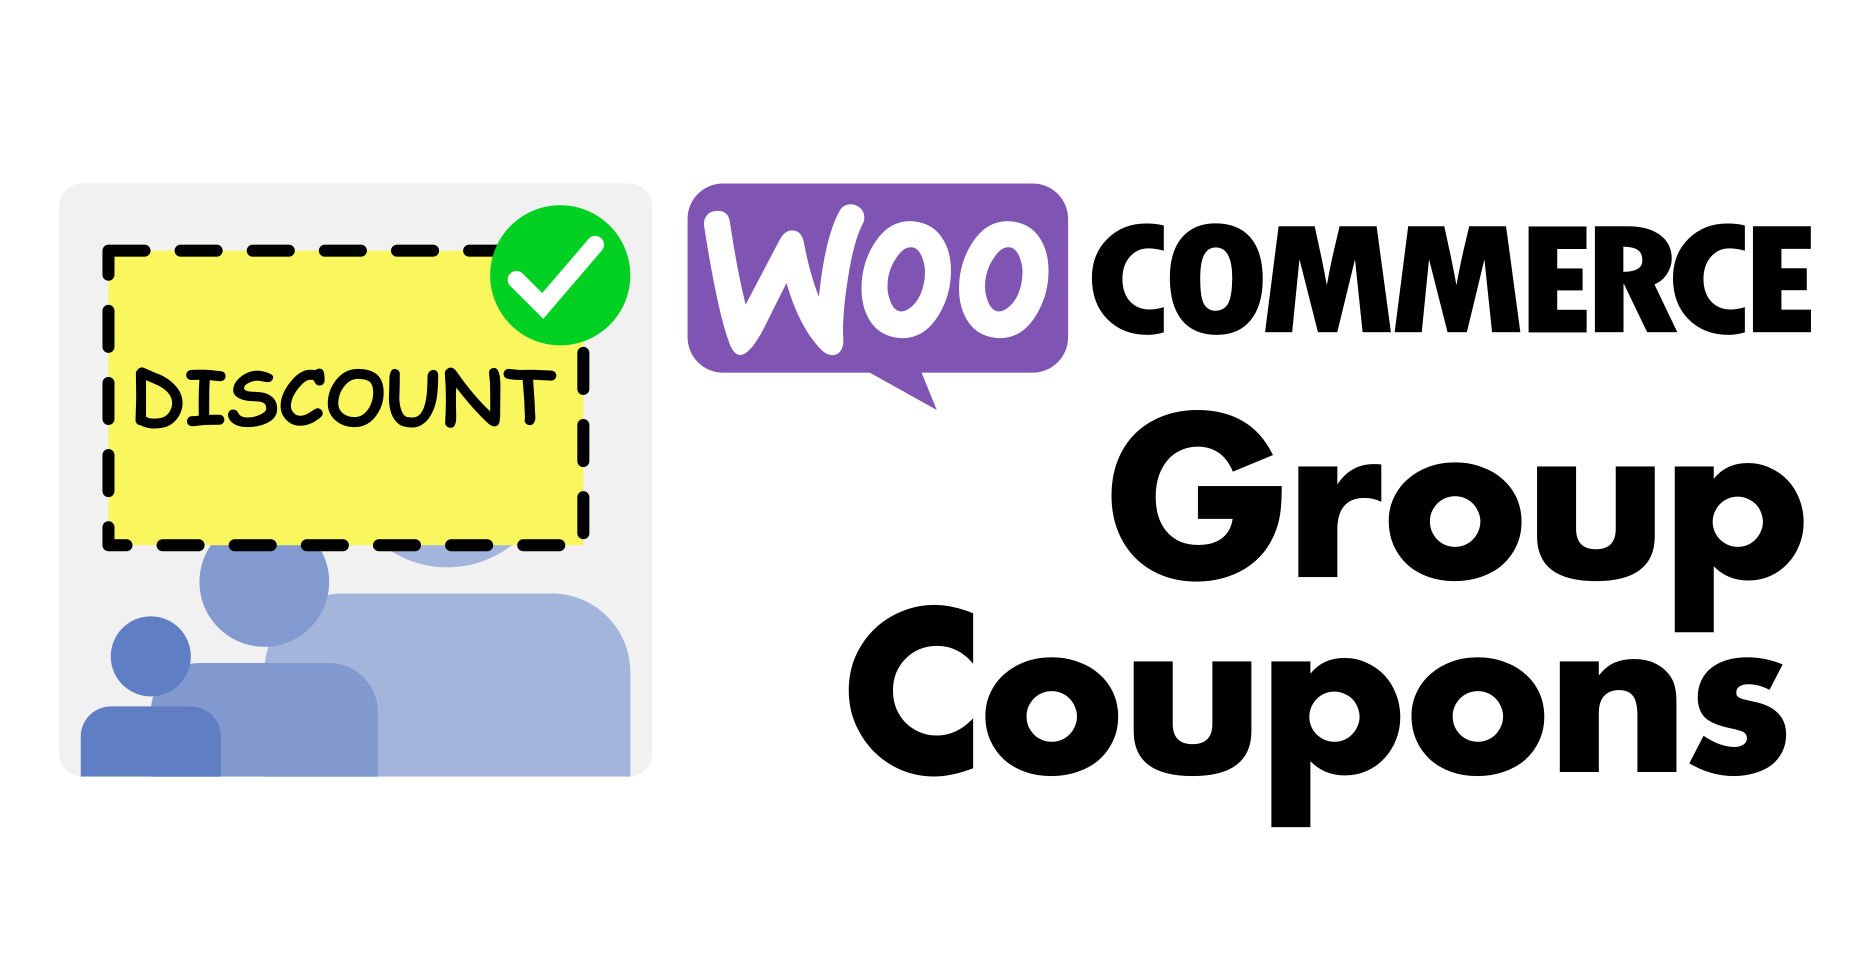 WooCommerce Group Coupons.jpg